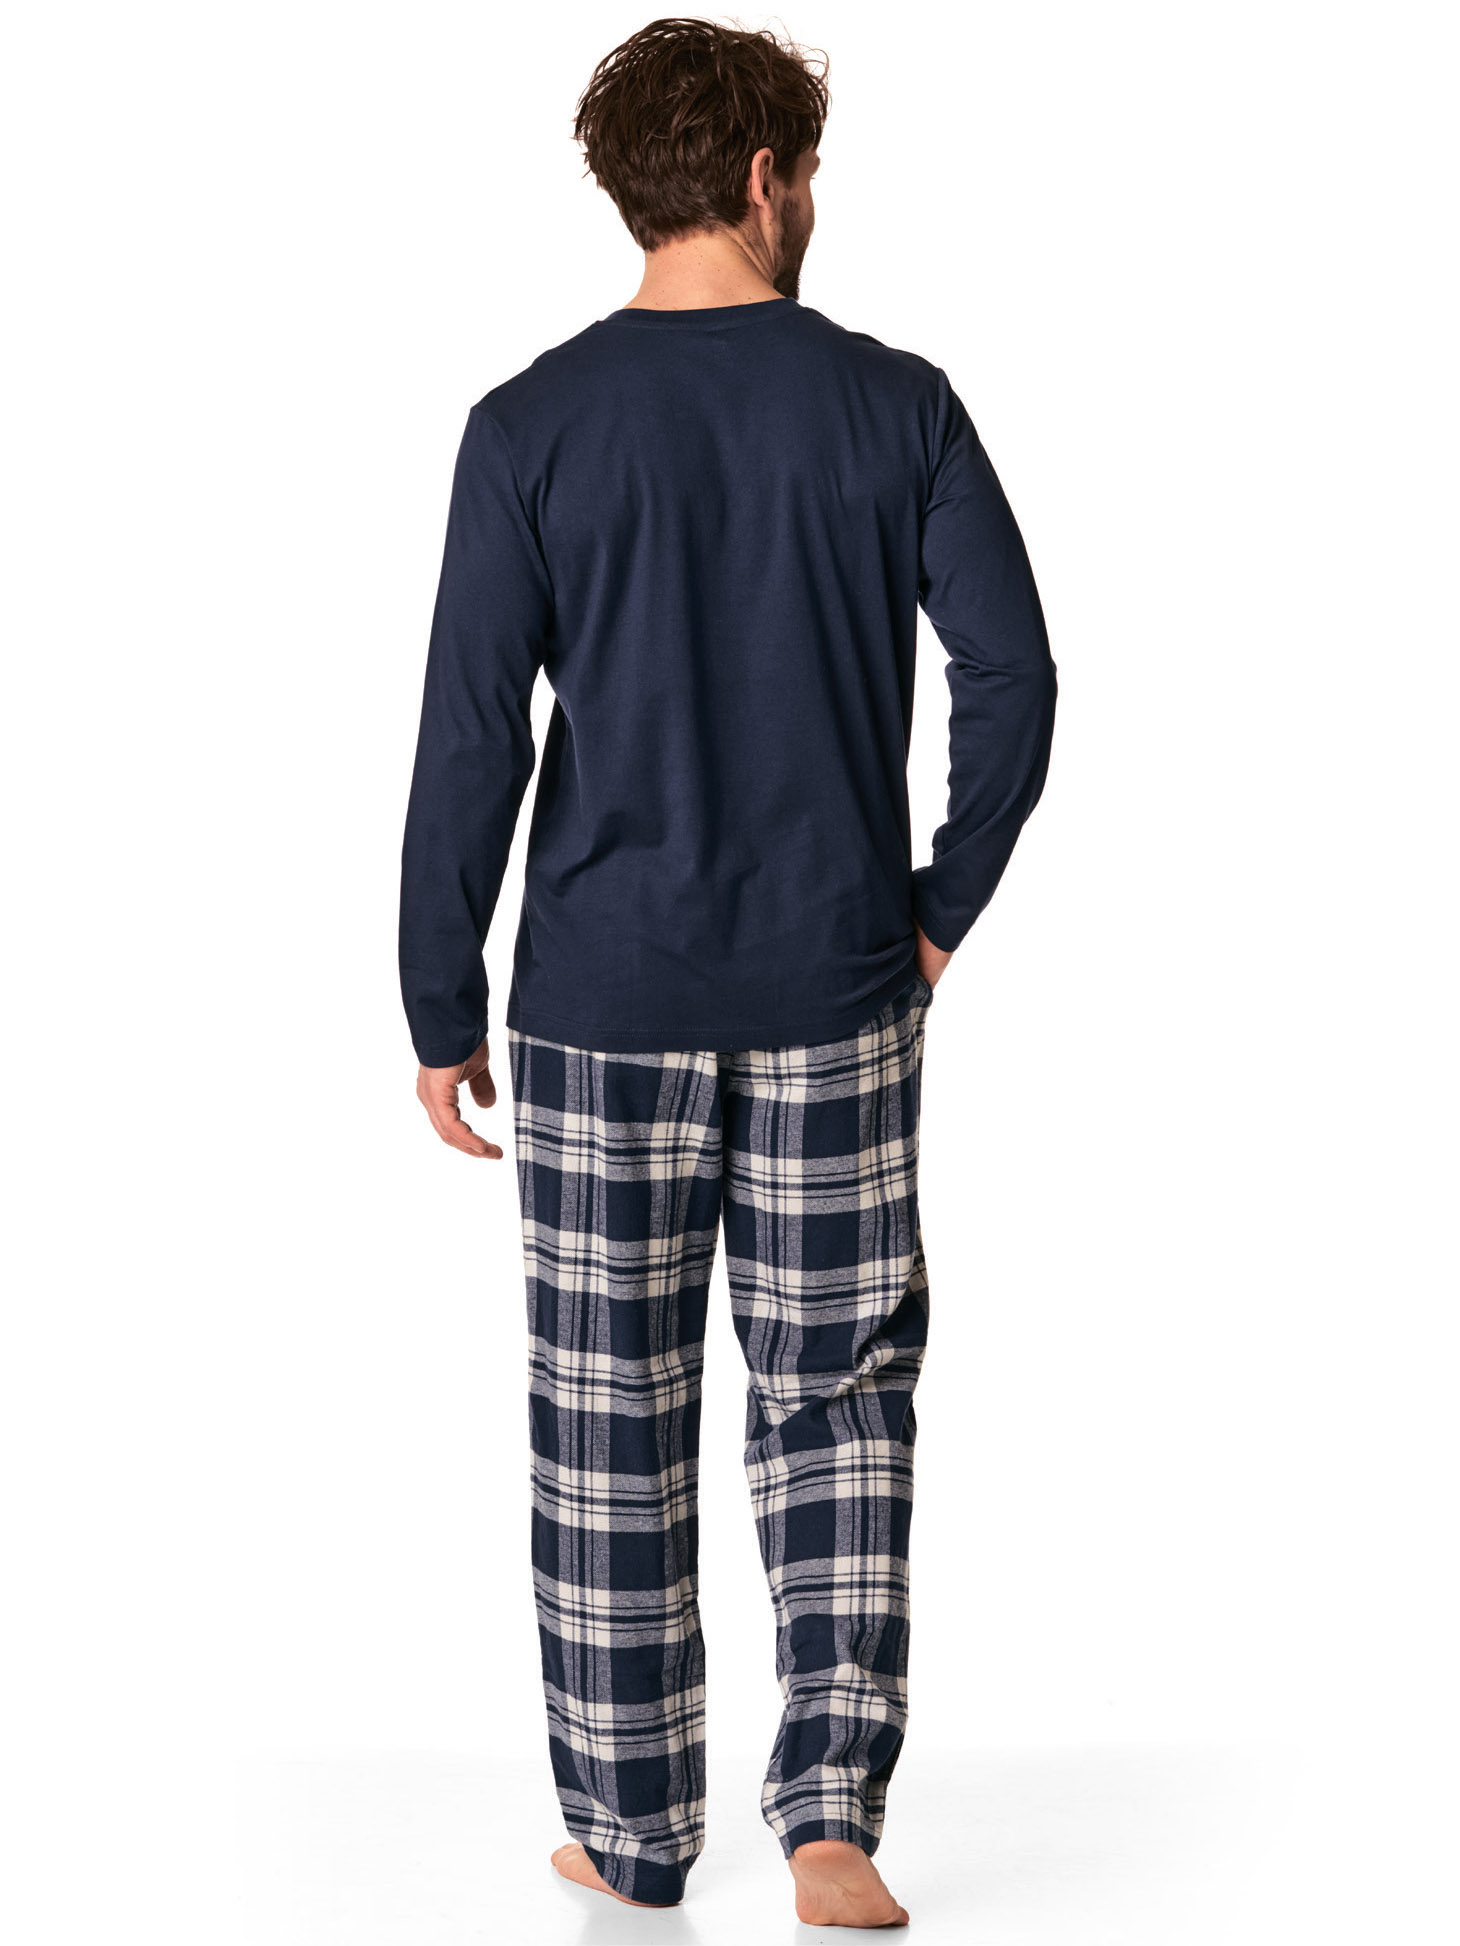 Men's cotton pajamas / home set with jersey top and flannel pants Key MNS 863 B22 3XL-4XL #4